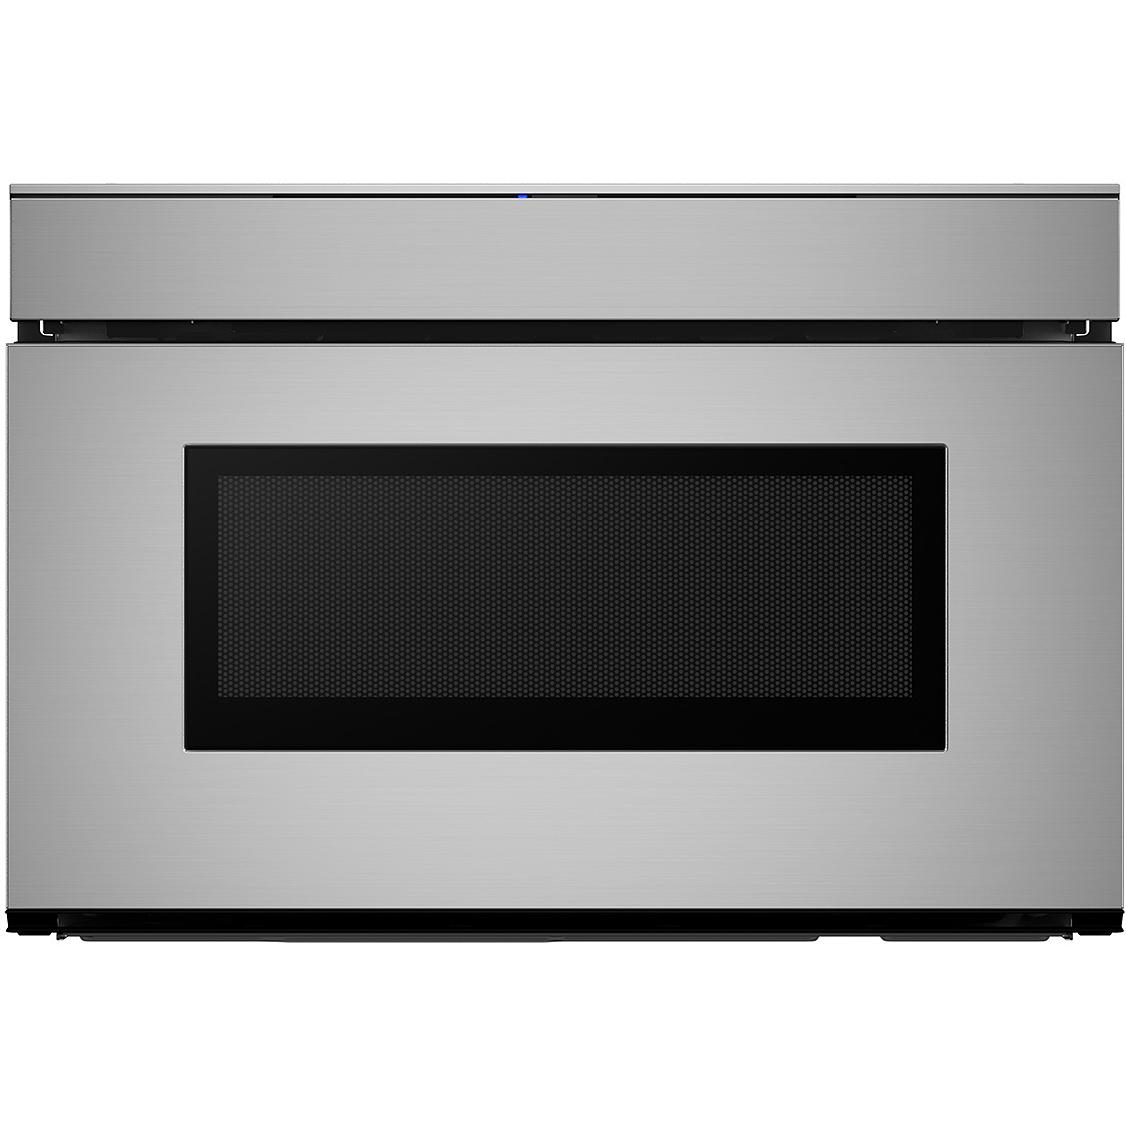 24-inch, 1.2 cu. ft. Built-in Microwave Oven with Wi-Fi SMD2479KSC IMAGE 1